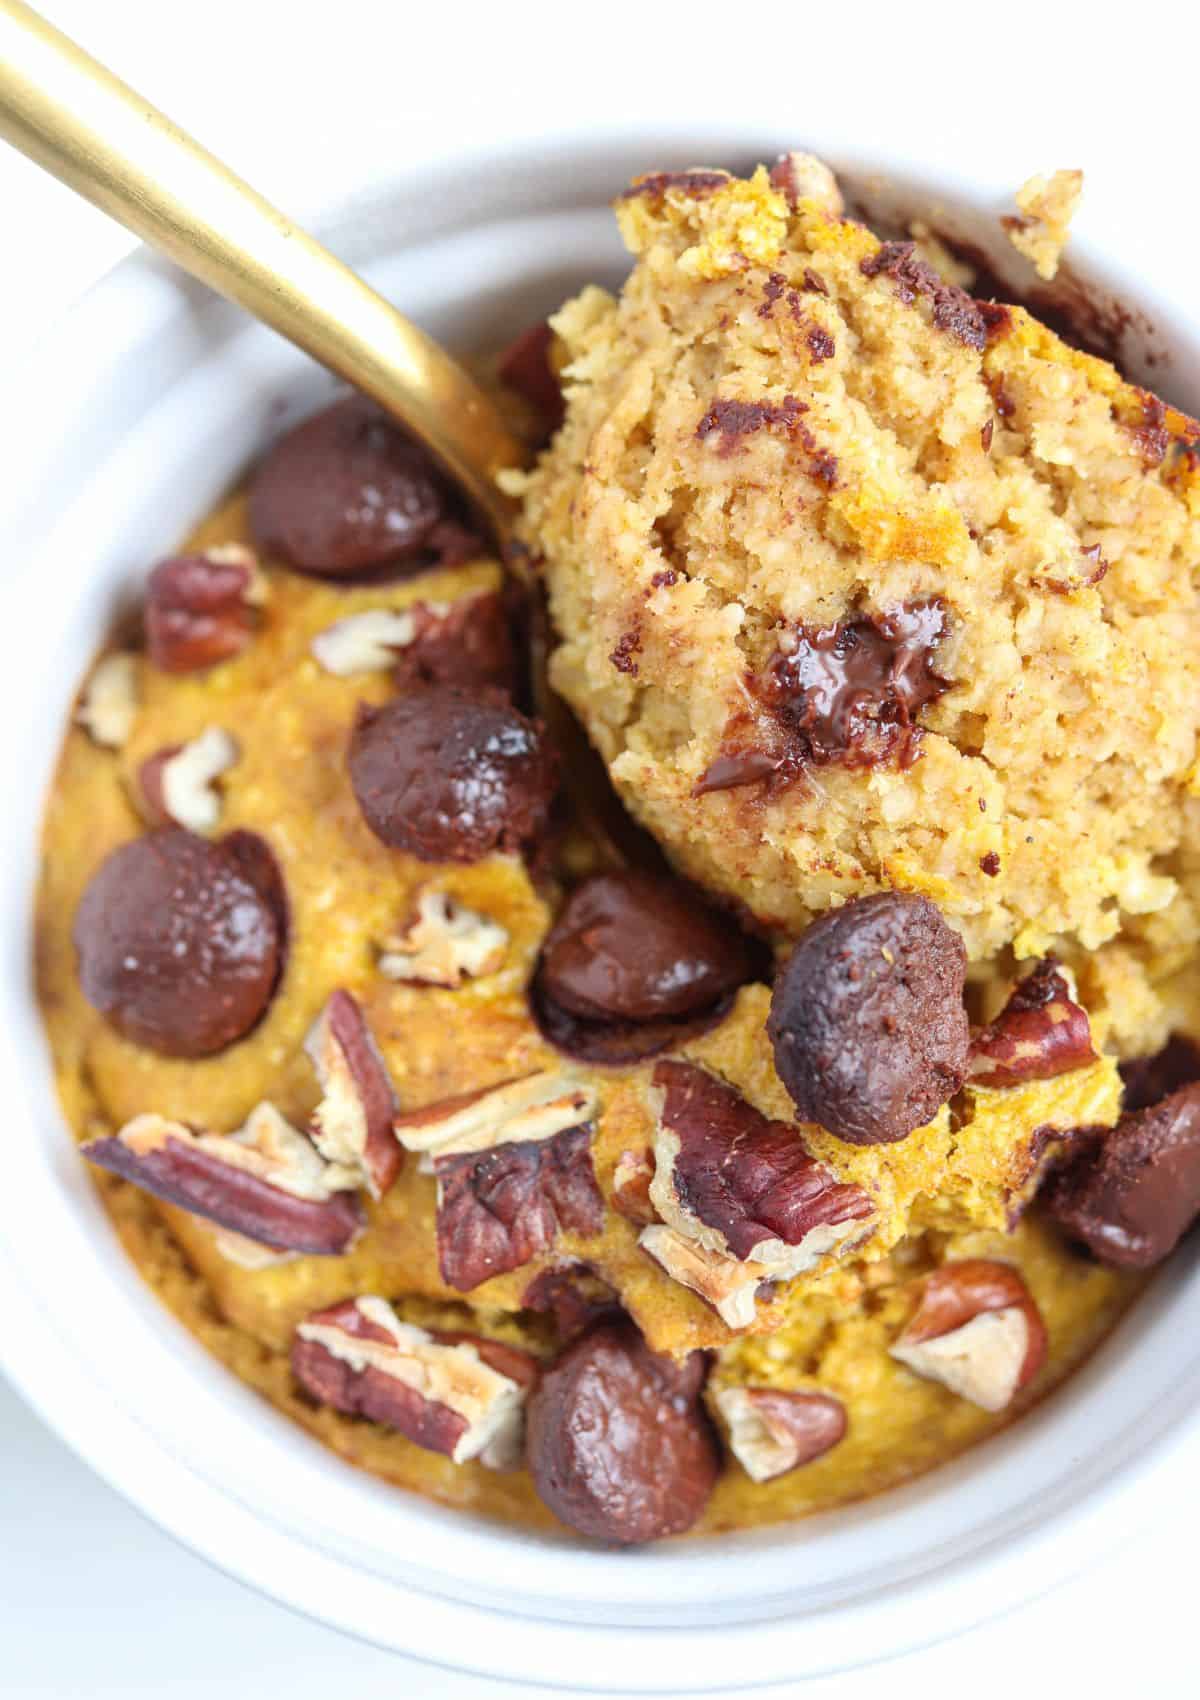 pumpkin blended baked oats in a white ramekin with chocolate chips and pecans.